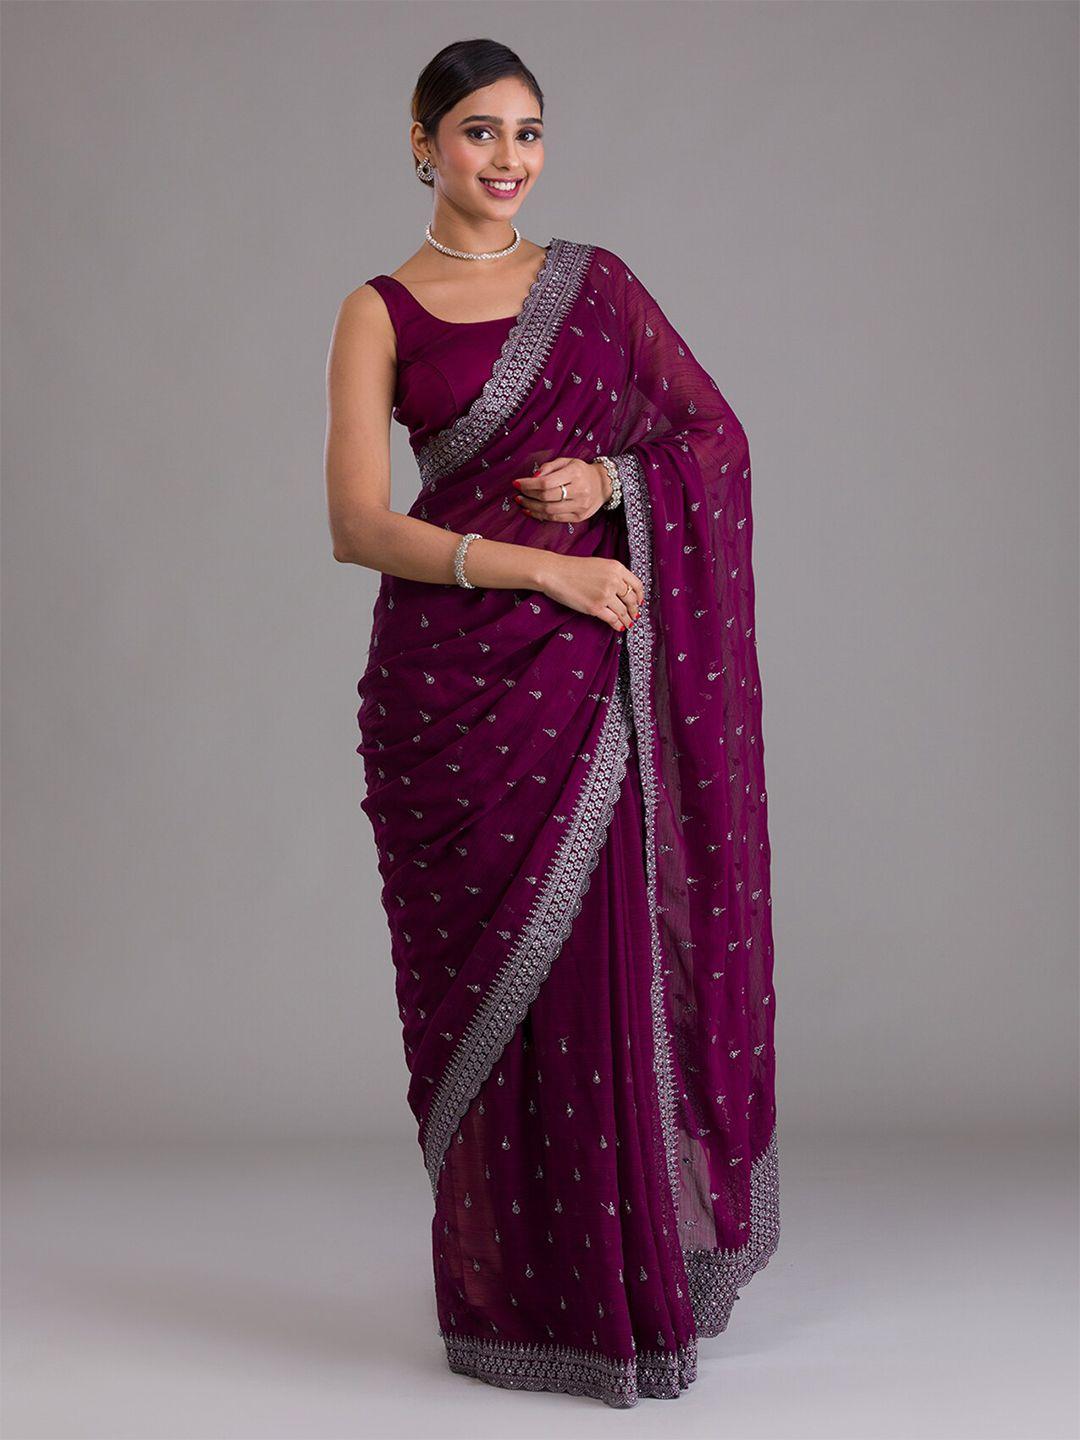 koskii-maroon-&-silver-toned-floral-embroidered-heavy-work-saree